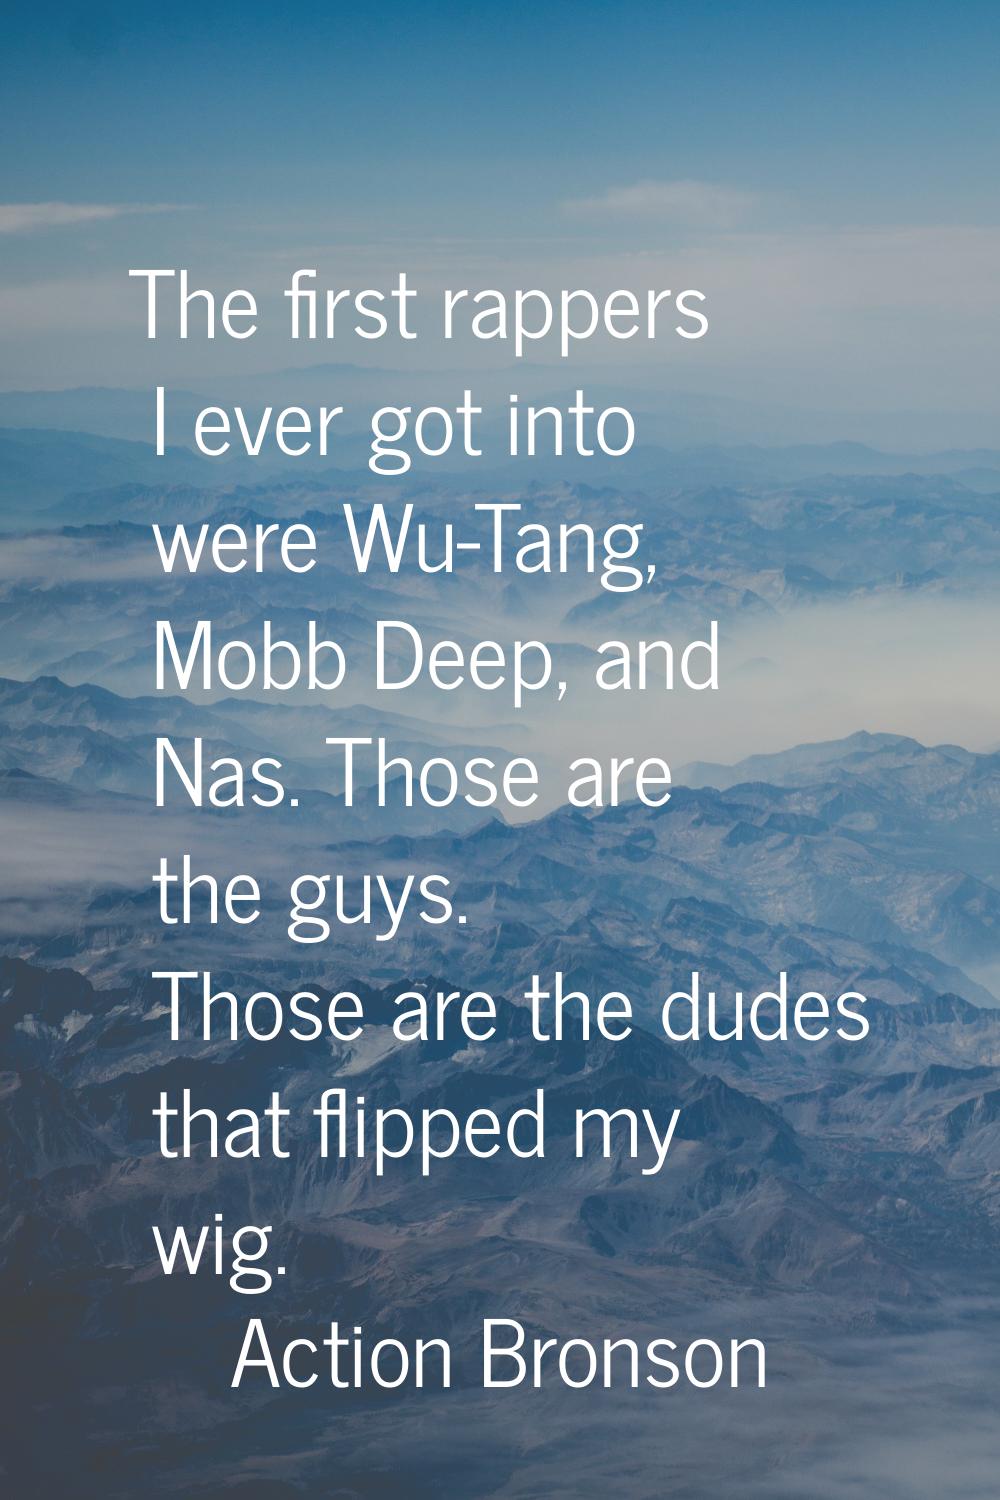 The first rappers I ever got into were Wu-Tang, Mobb Deep, and Nas. Those are the guys. Those are t